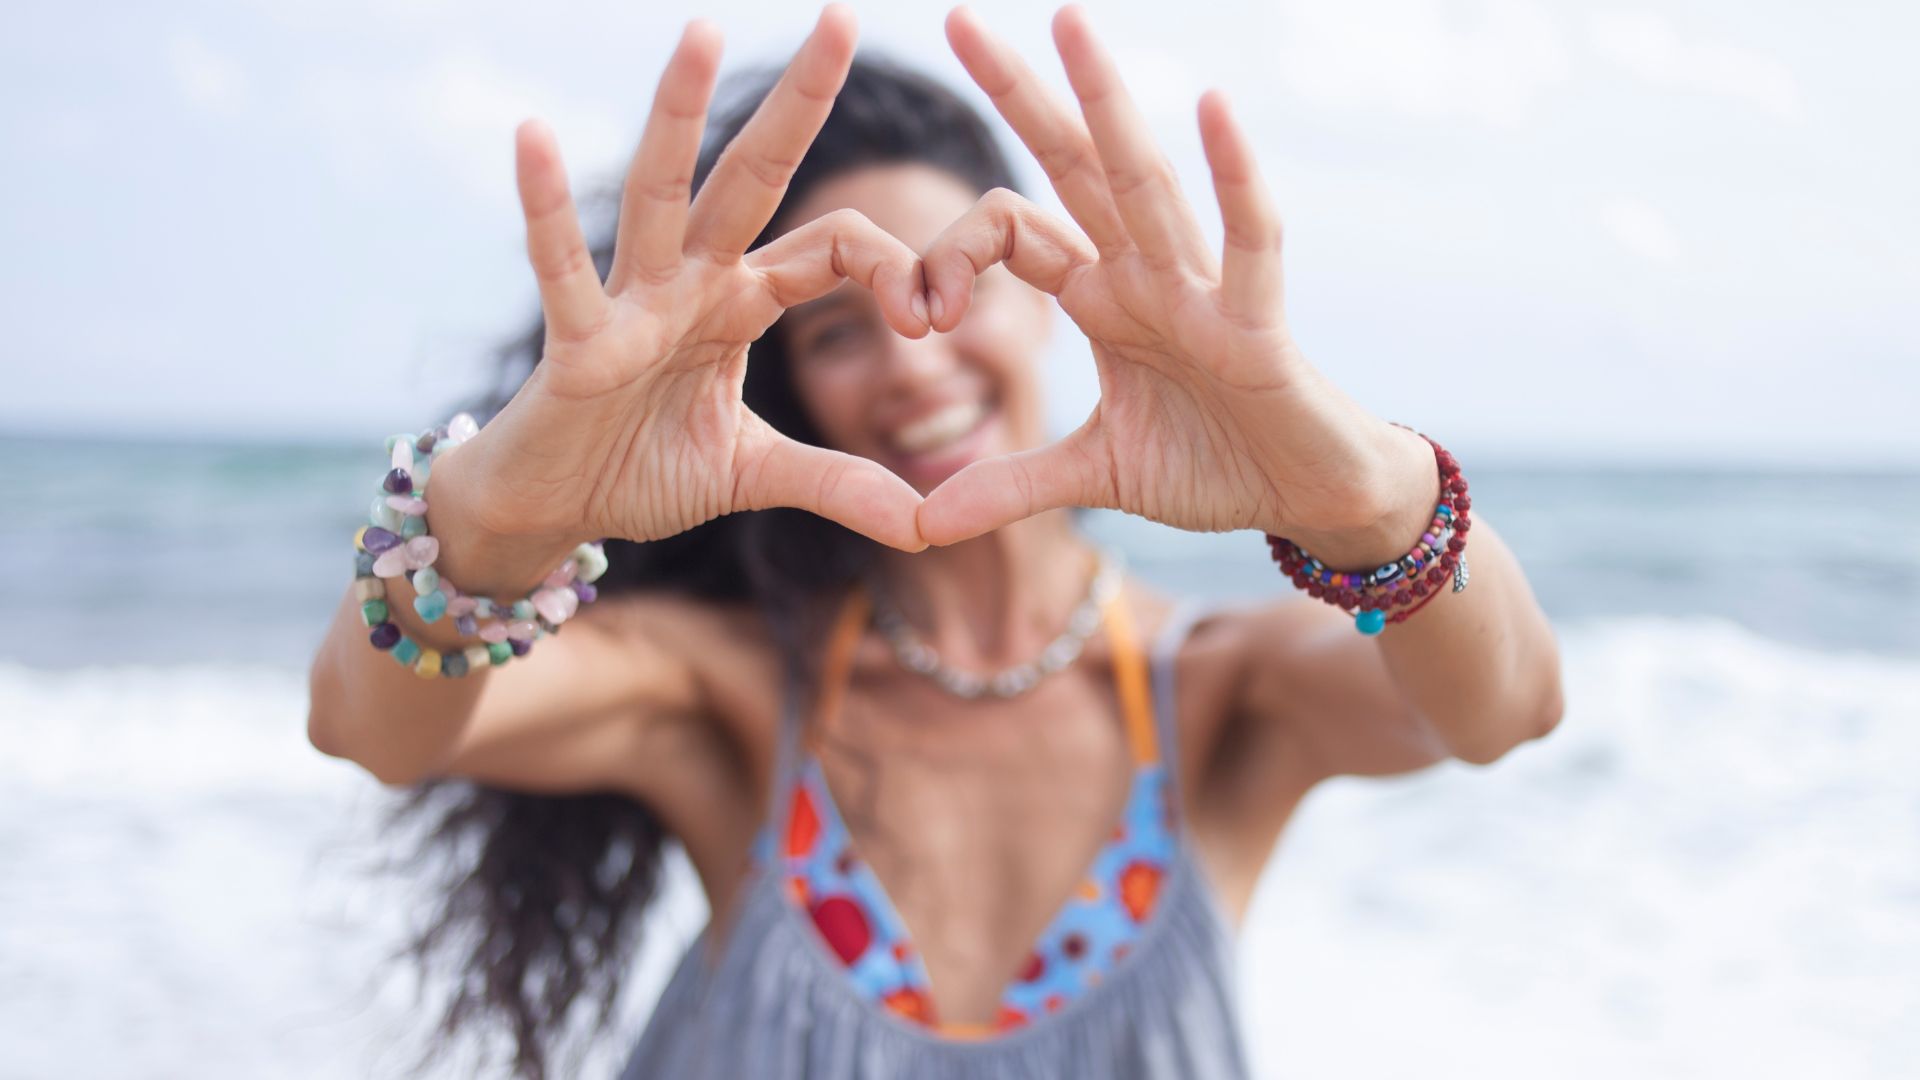 A woman smiles while making a heart with her hands, the beach in the background.